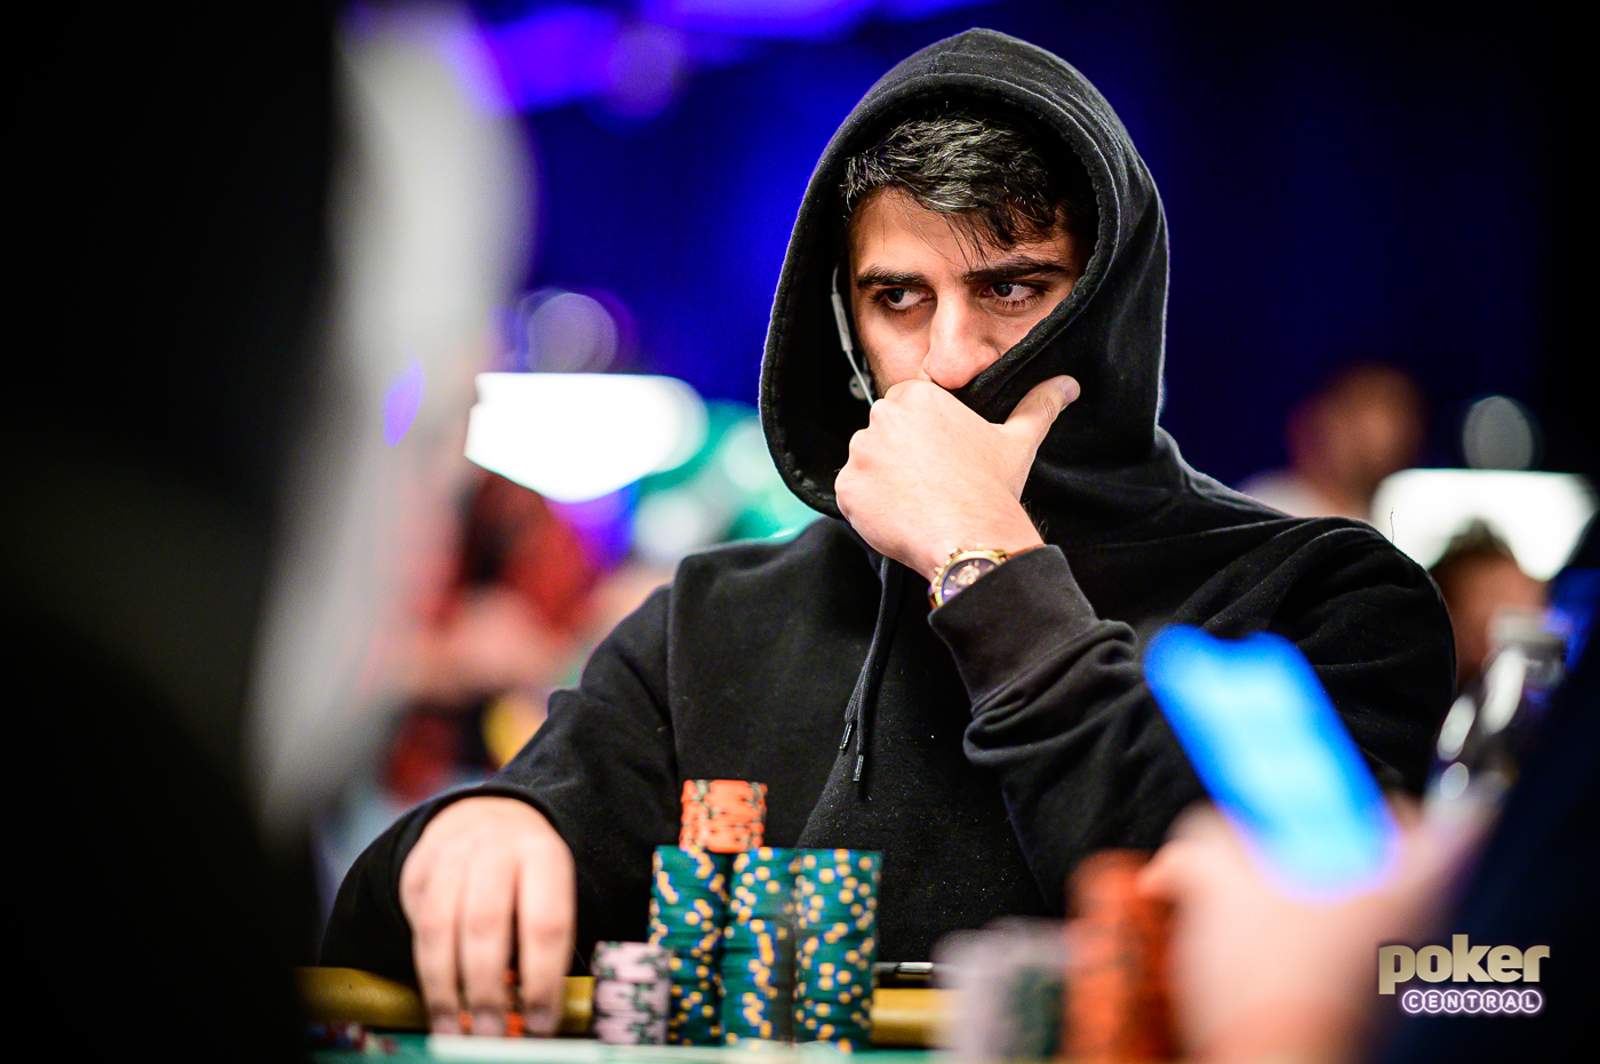 A Surreal Run for Daniel Hachem Ends Under the Banner of His Father